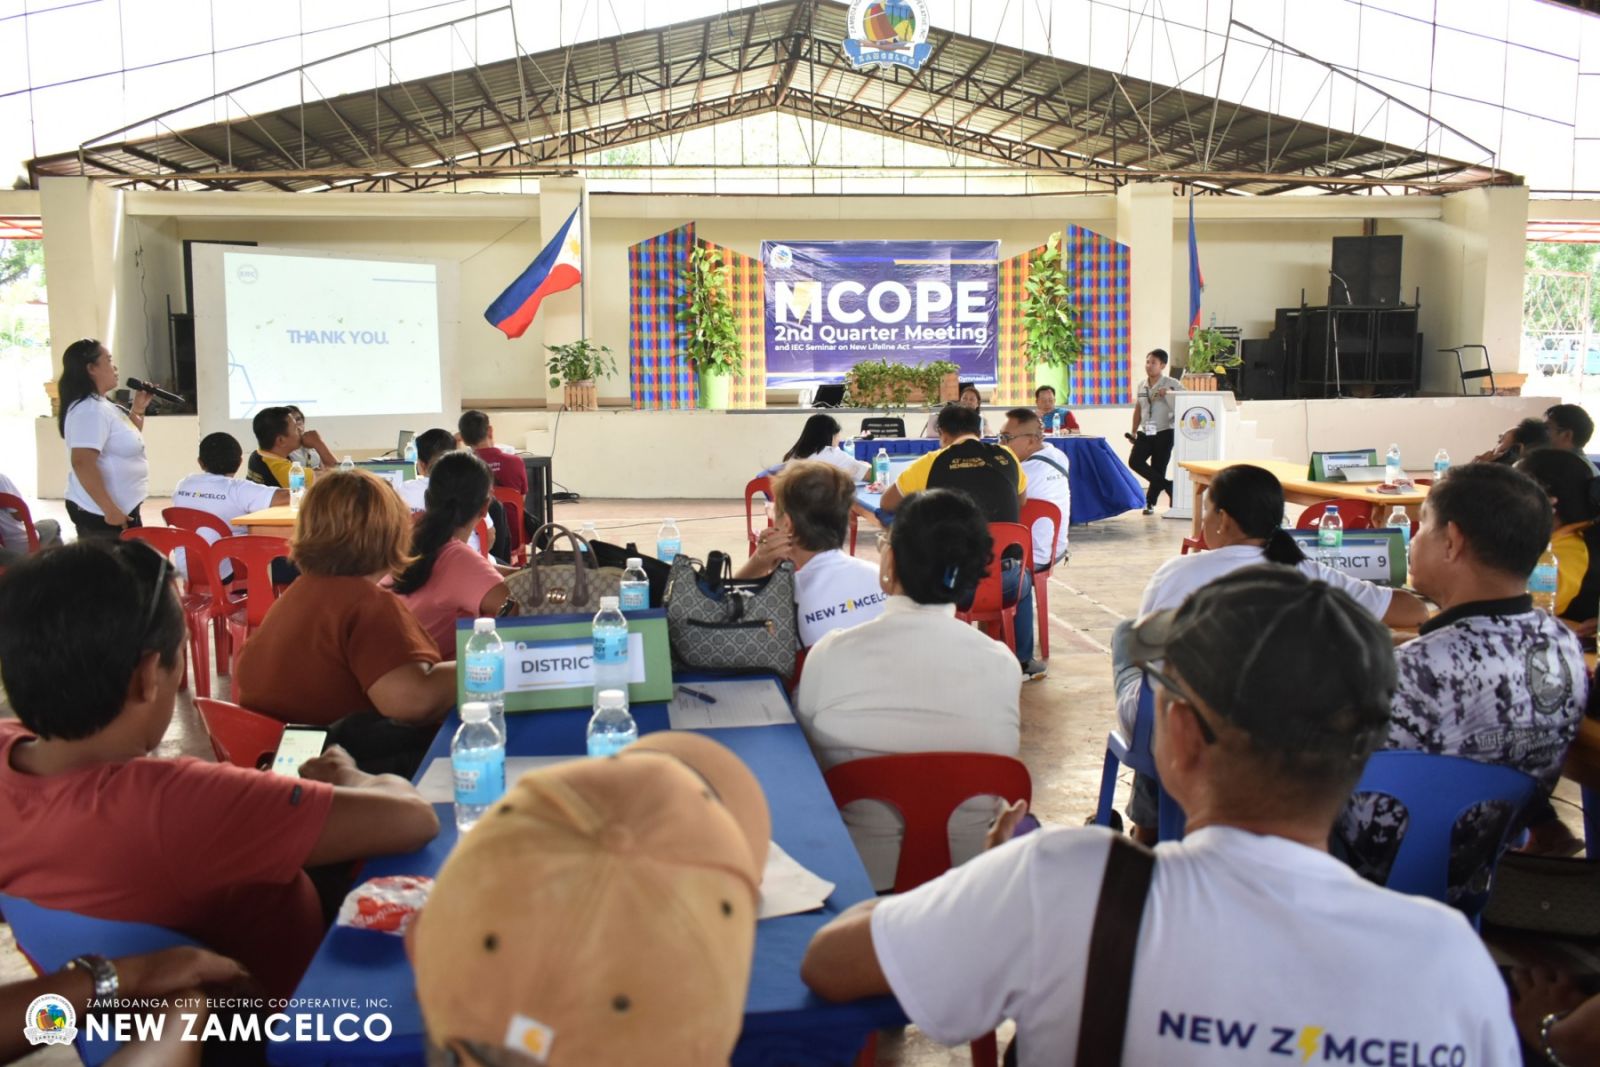 NEW ZAMCELCO UPDATE | ZAMCELCO meets with MCOPE Officers on their Quarter Meeting to discuss the New Lifeline Act and Barangay MCOPE Accomplishments and Concerns